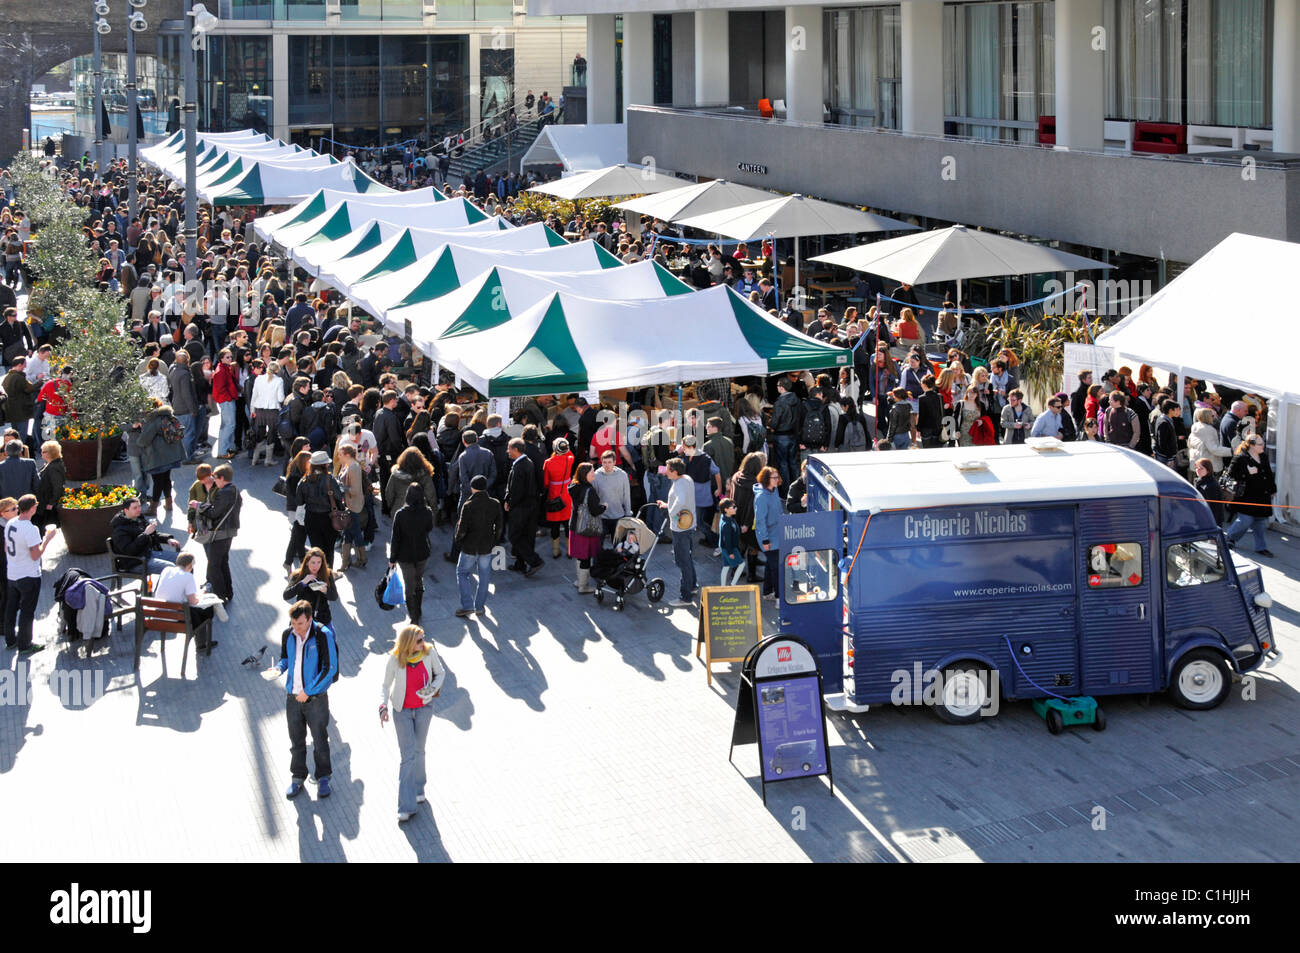 London street scene view from above looking down on crowds of people at Royal Festival Hall forecourt being used for a weekend food market England UK Stock Photo